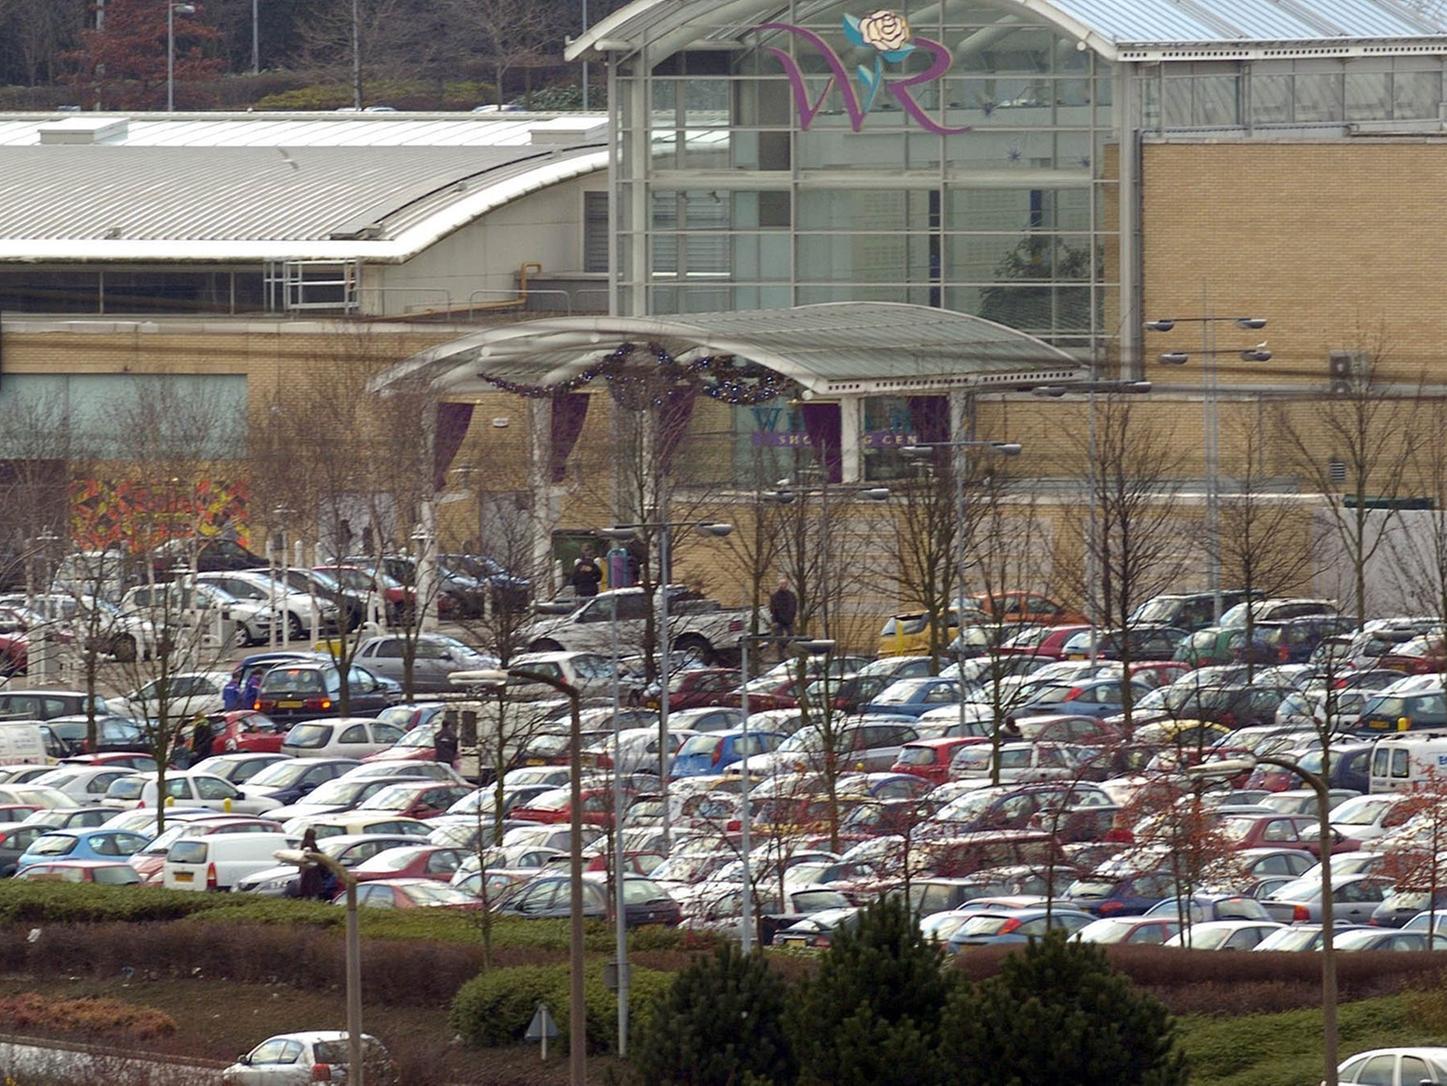 First of all, find a space. Full cars parks at the White Rose Centre on Boxing Day 2005.